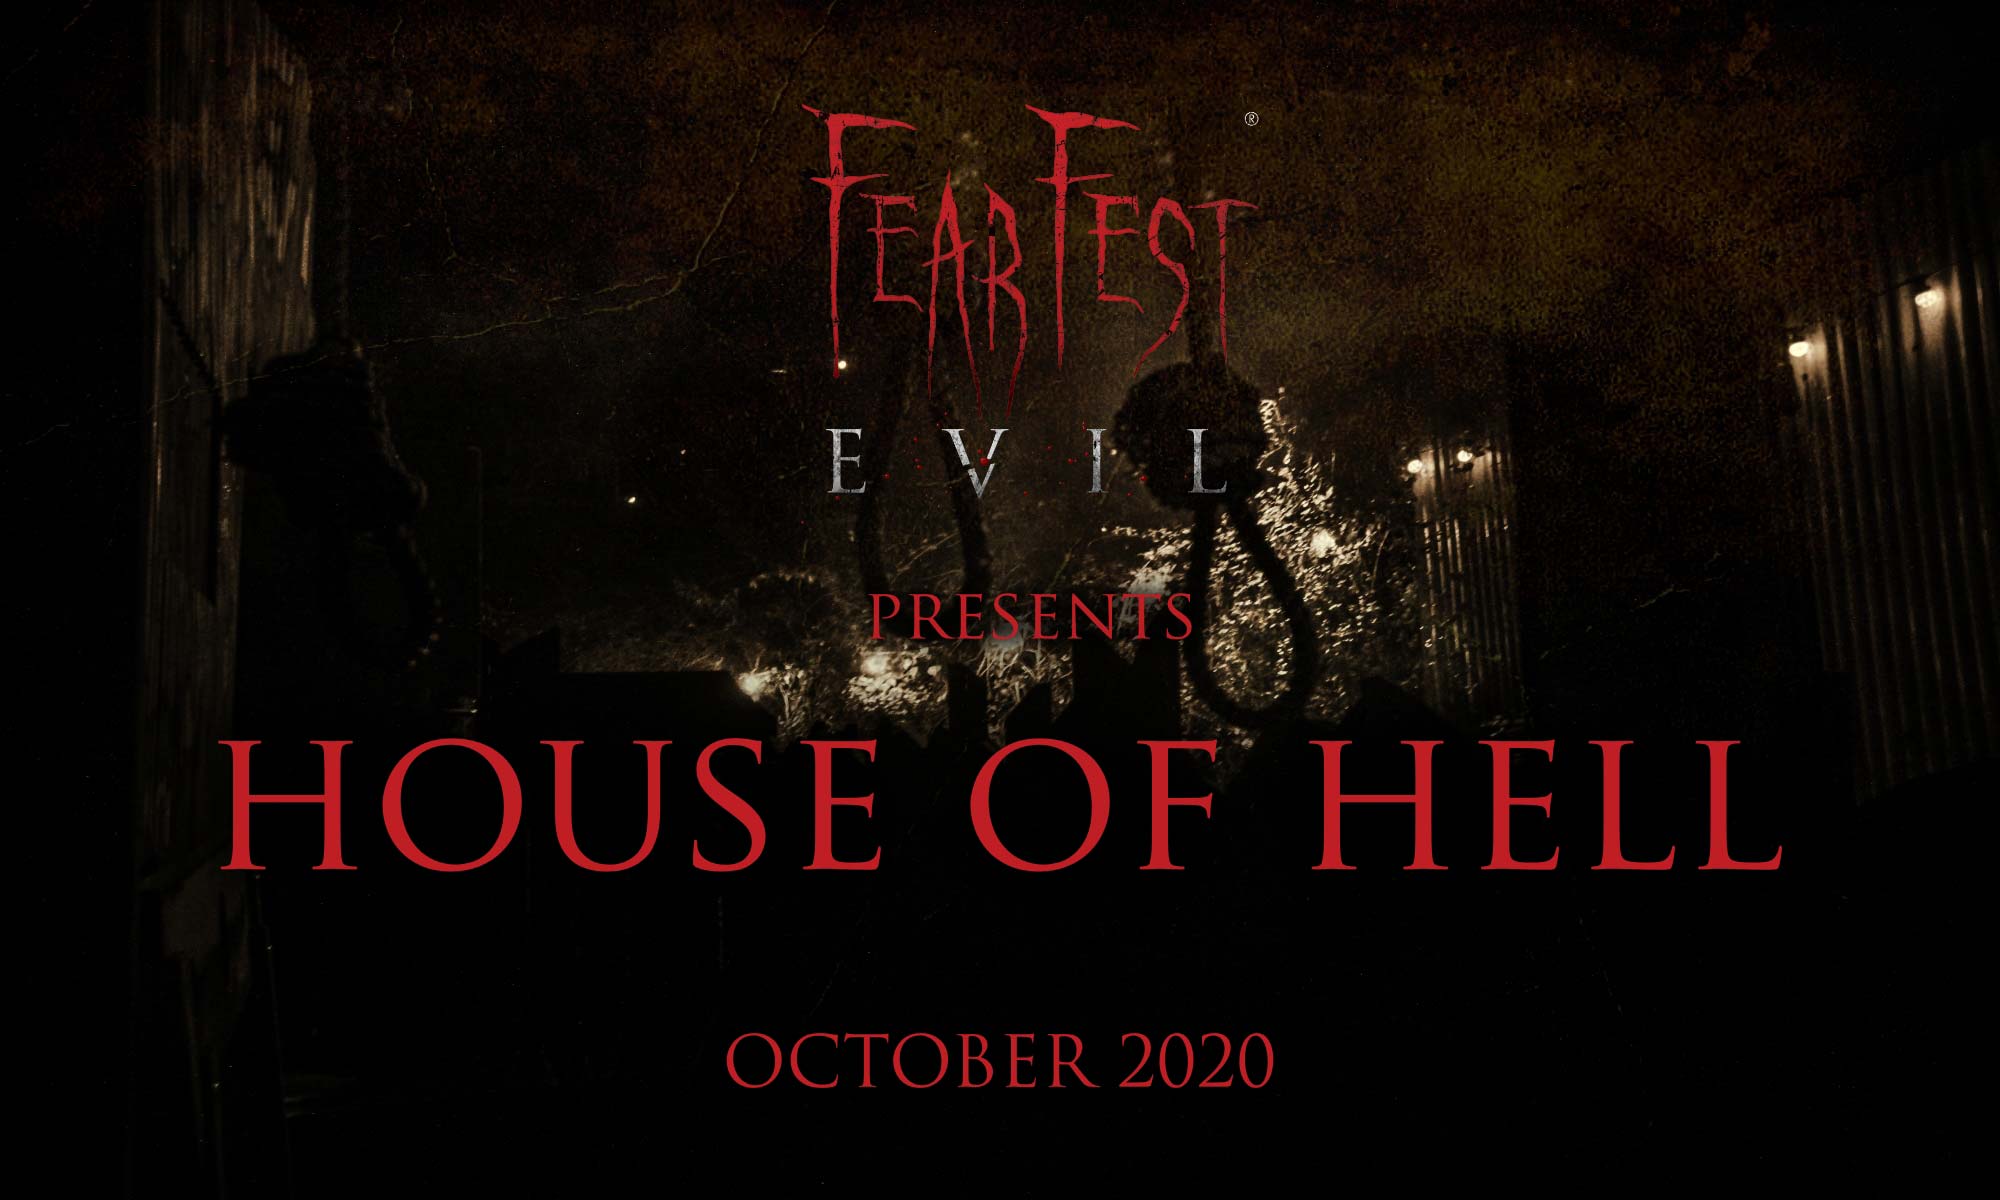 FearFest-Evil 'House of Hell'